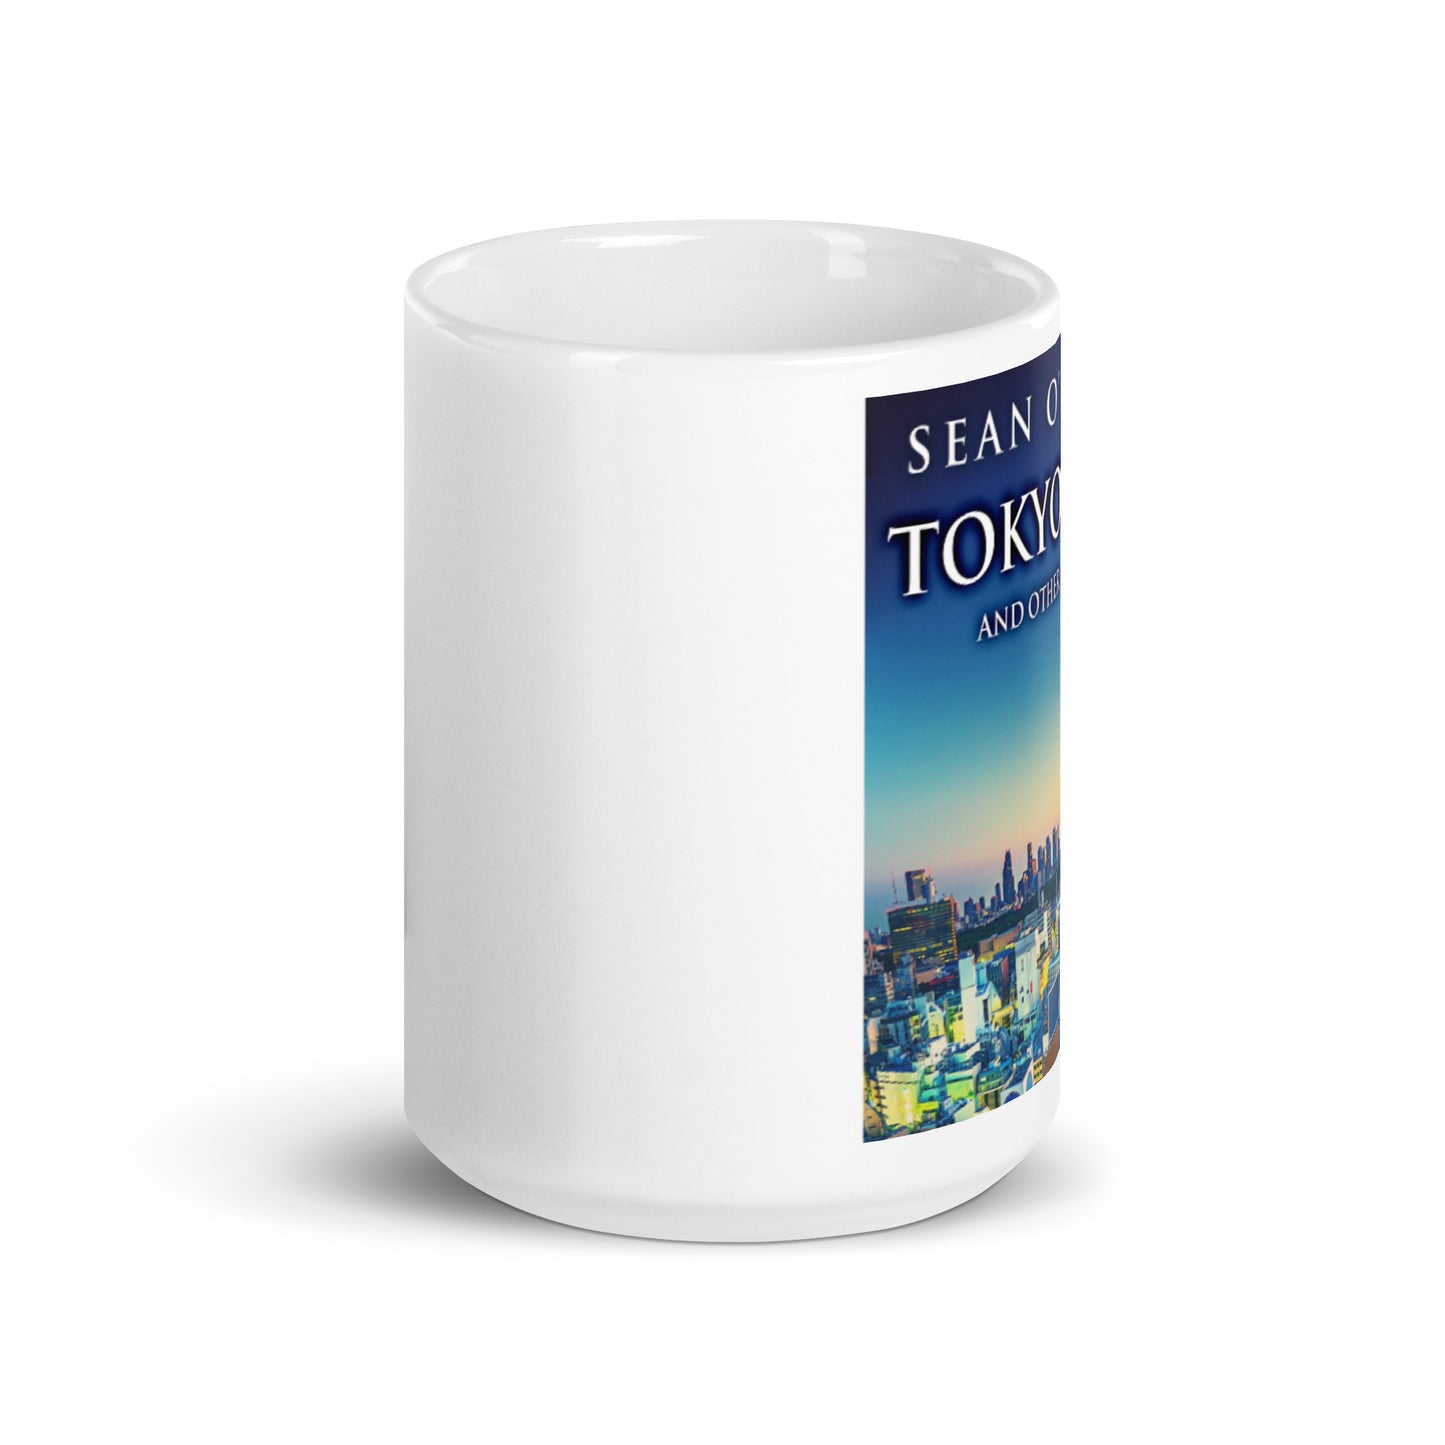 Tokyo Jazz And Other Stories - White Coffee Mug